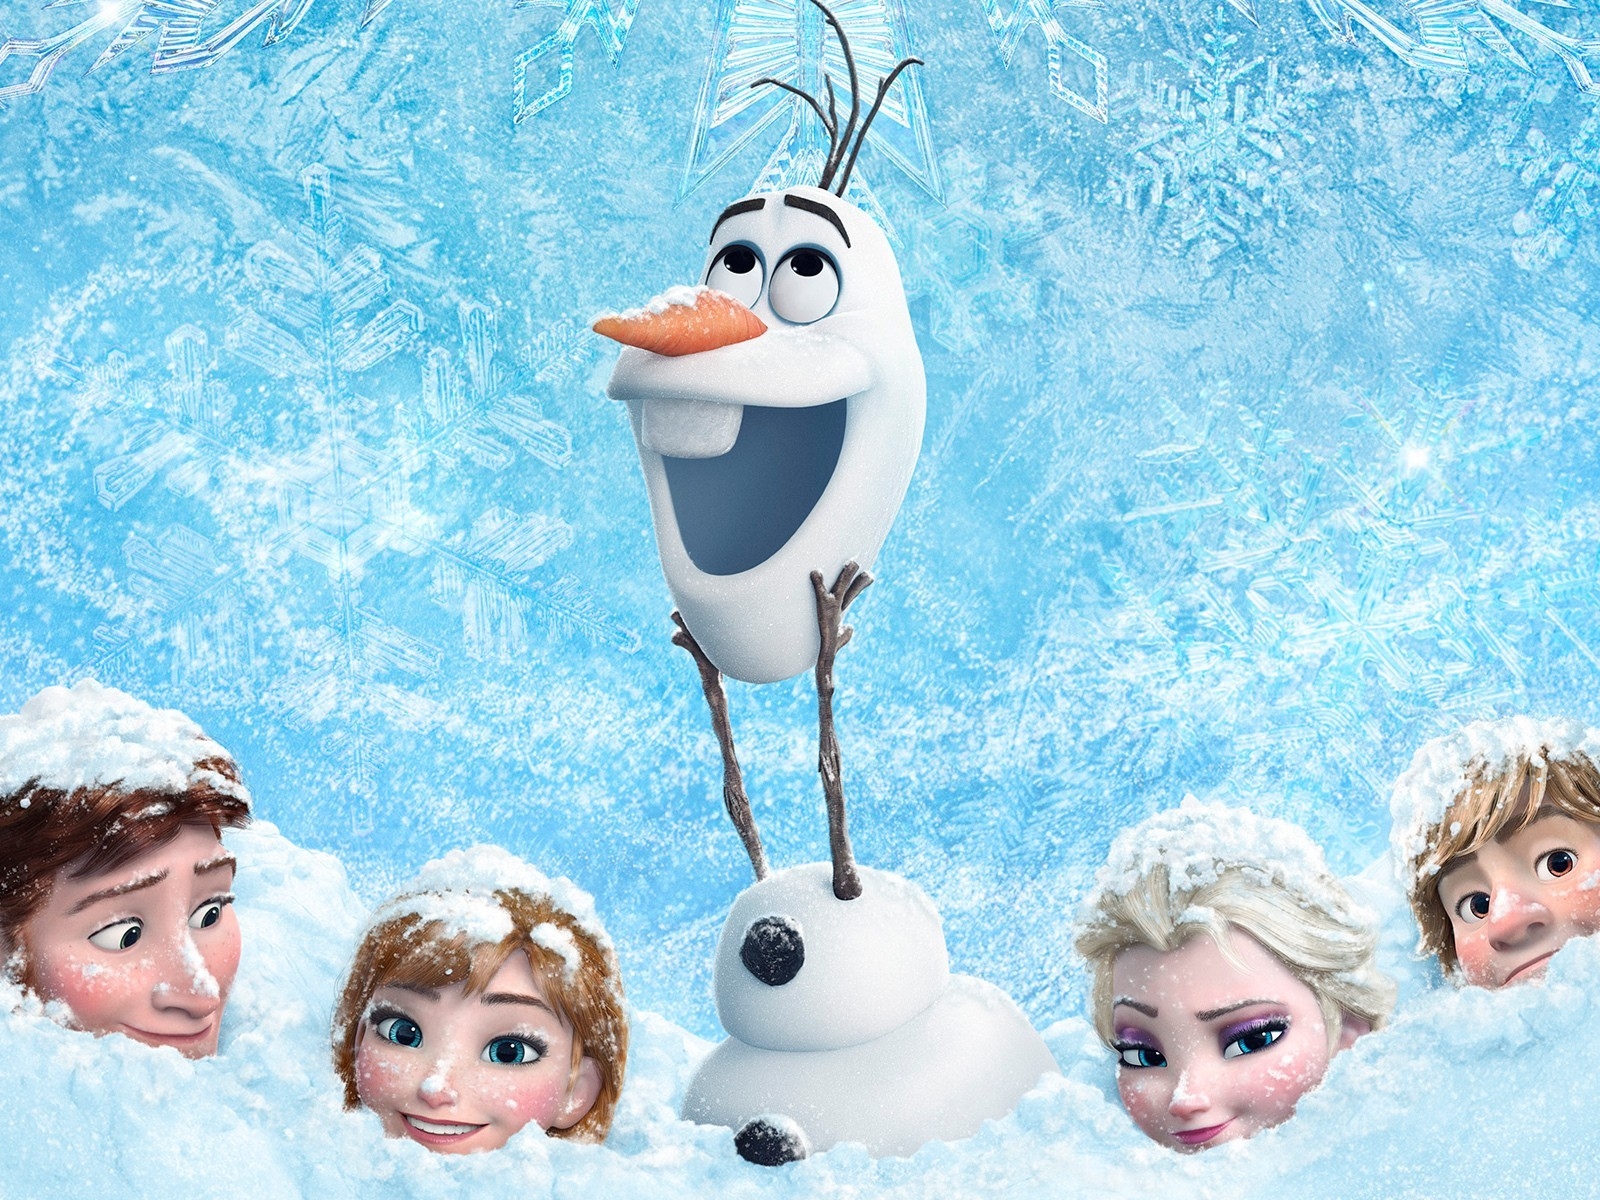 Frozen Animation for 1600 x 1200 resolution